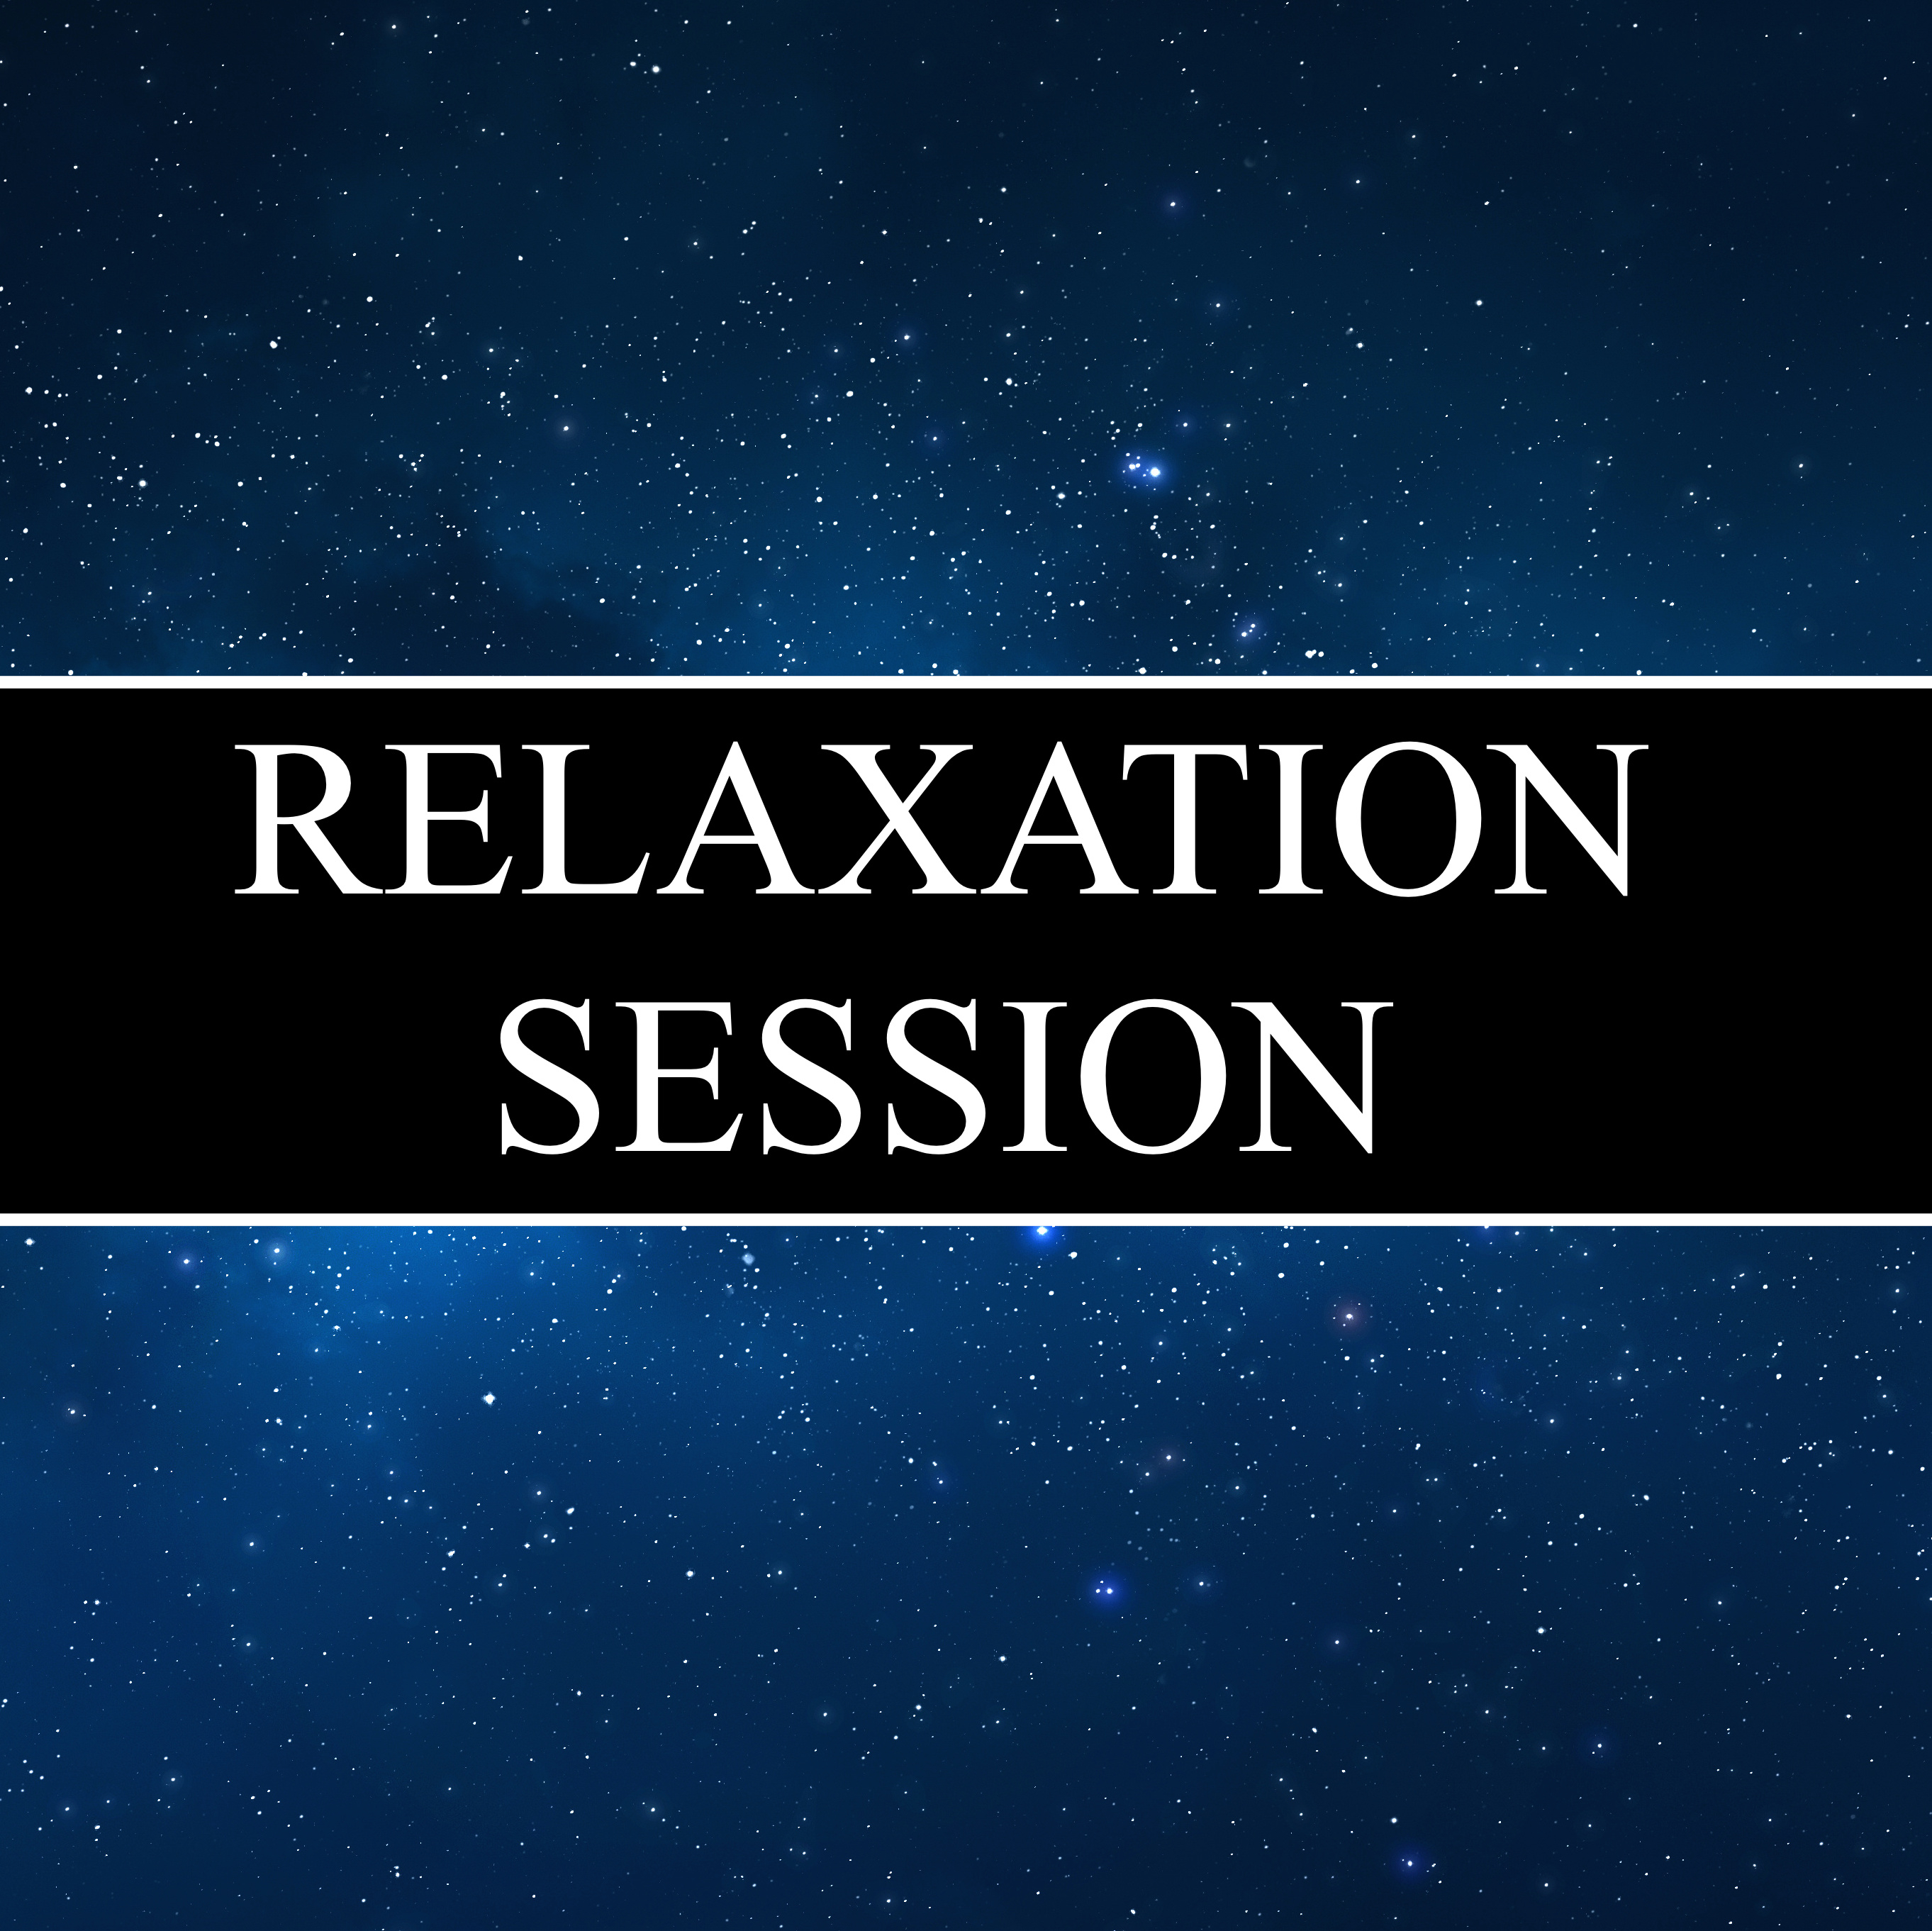 Relaxation Sessions - Timeless Pieces for Inspiration and Relaxation, Ambient Background Noise and Calm Sounds